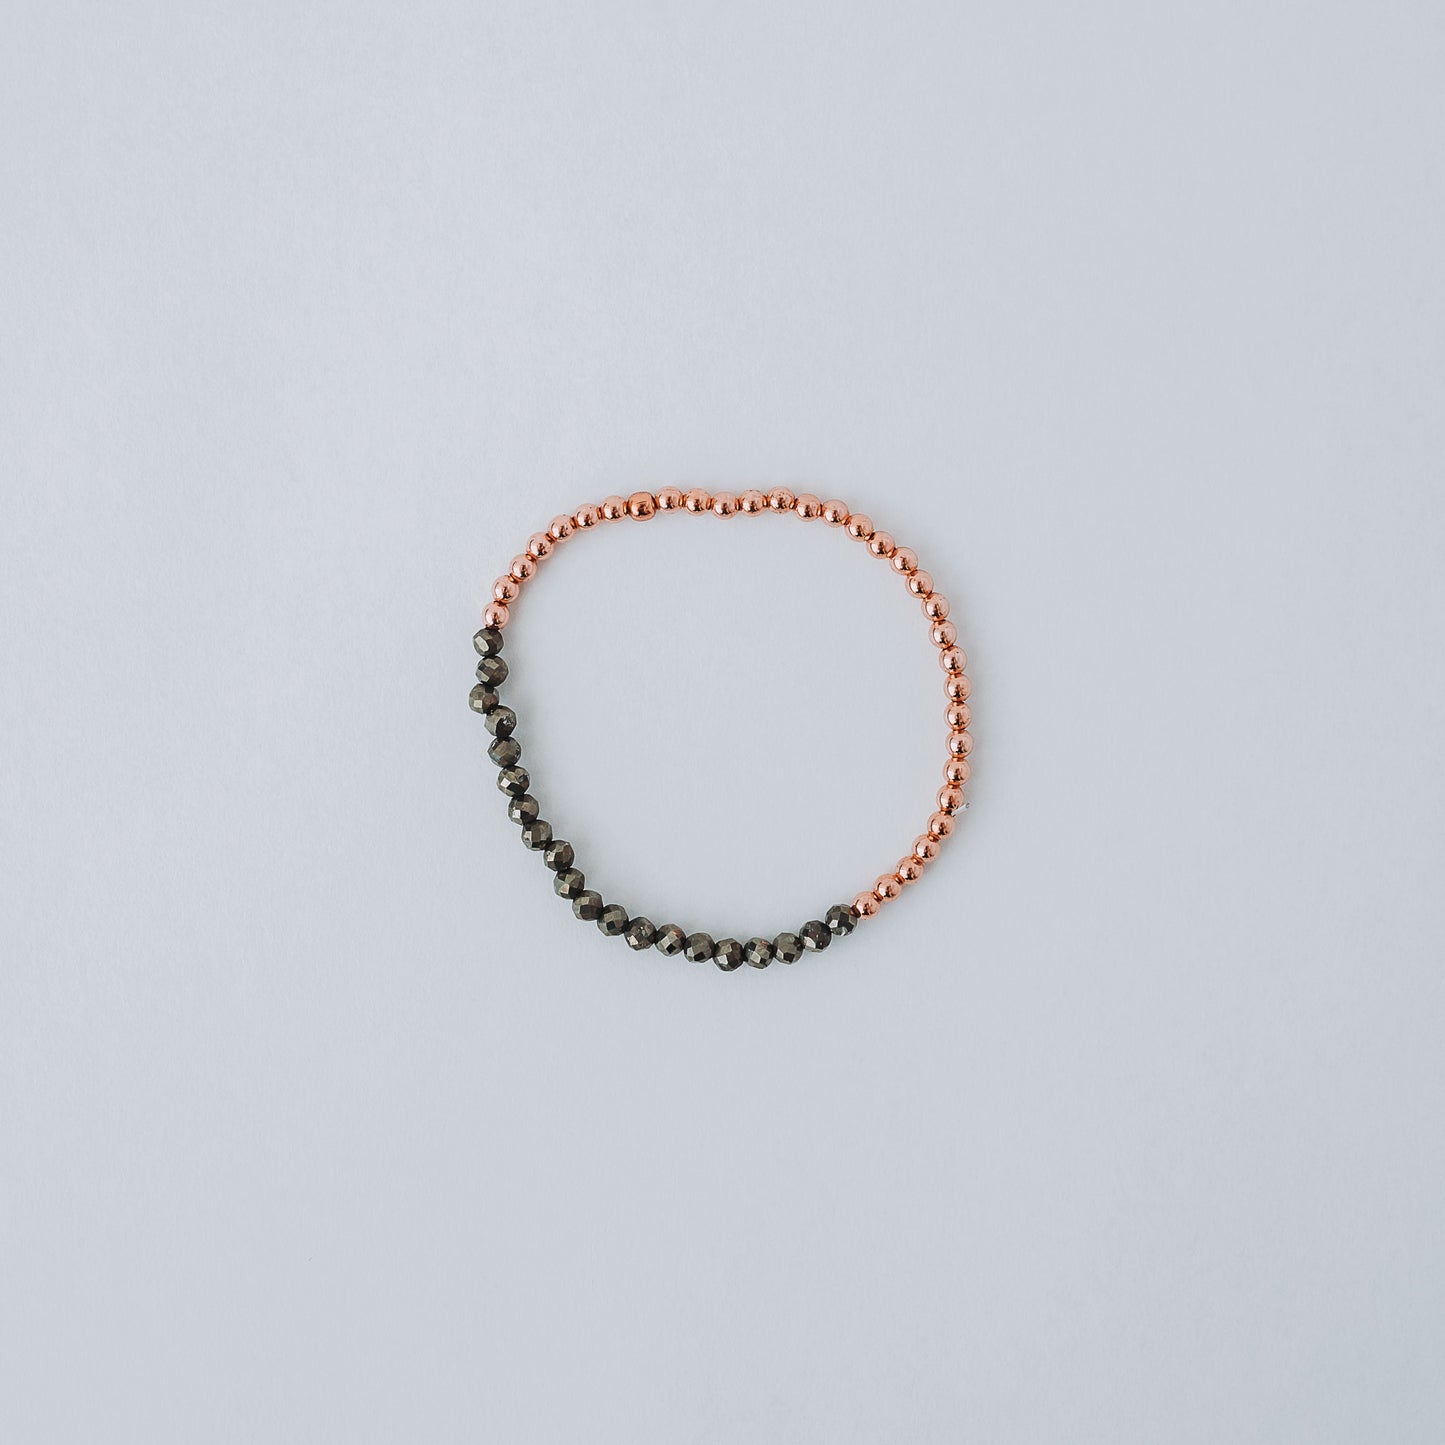 Solid Copper Beads